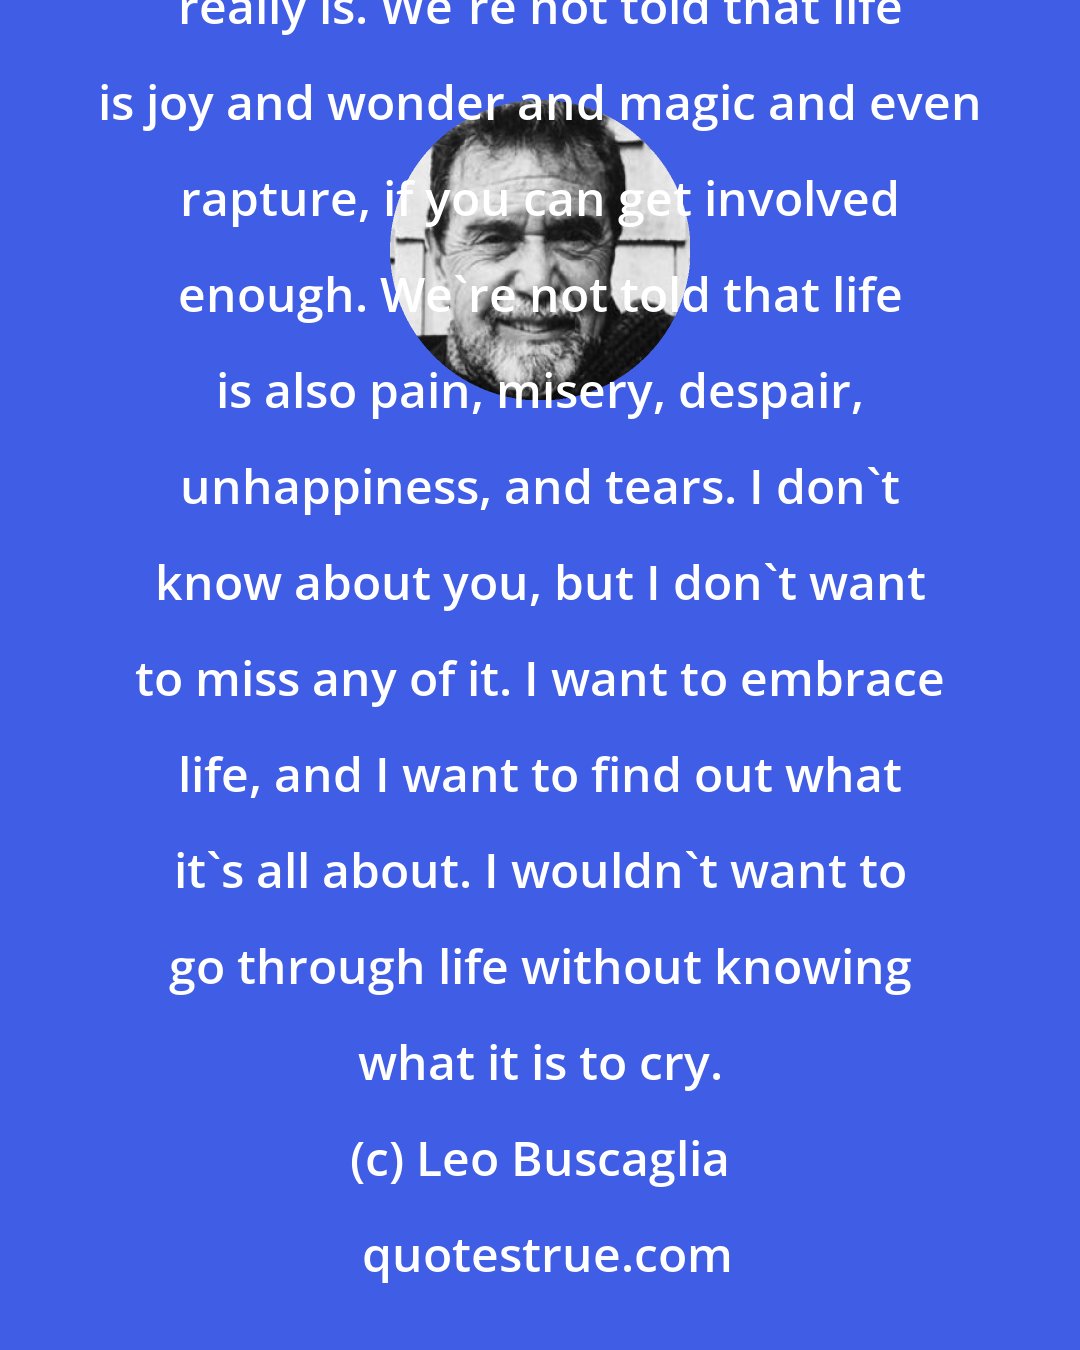 Leo Buscaglia: Why do we protect children from life? It's no wonder that we become afraid to live. We're not told what life really is. We're not told that life is joy and wonder and magic and even rapture, if you can get involved enough. We're not told that life is also pain, misery, despair, unhappiness, and tears. I don't know about you, but I don't want to miss any of it. I want to embrace life, and I want to find out what it's all about. I wouldn't want to go through life without knowing what it is to cry.